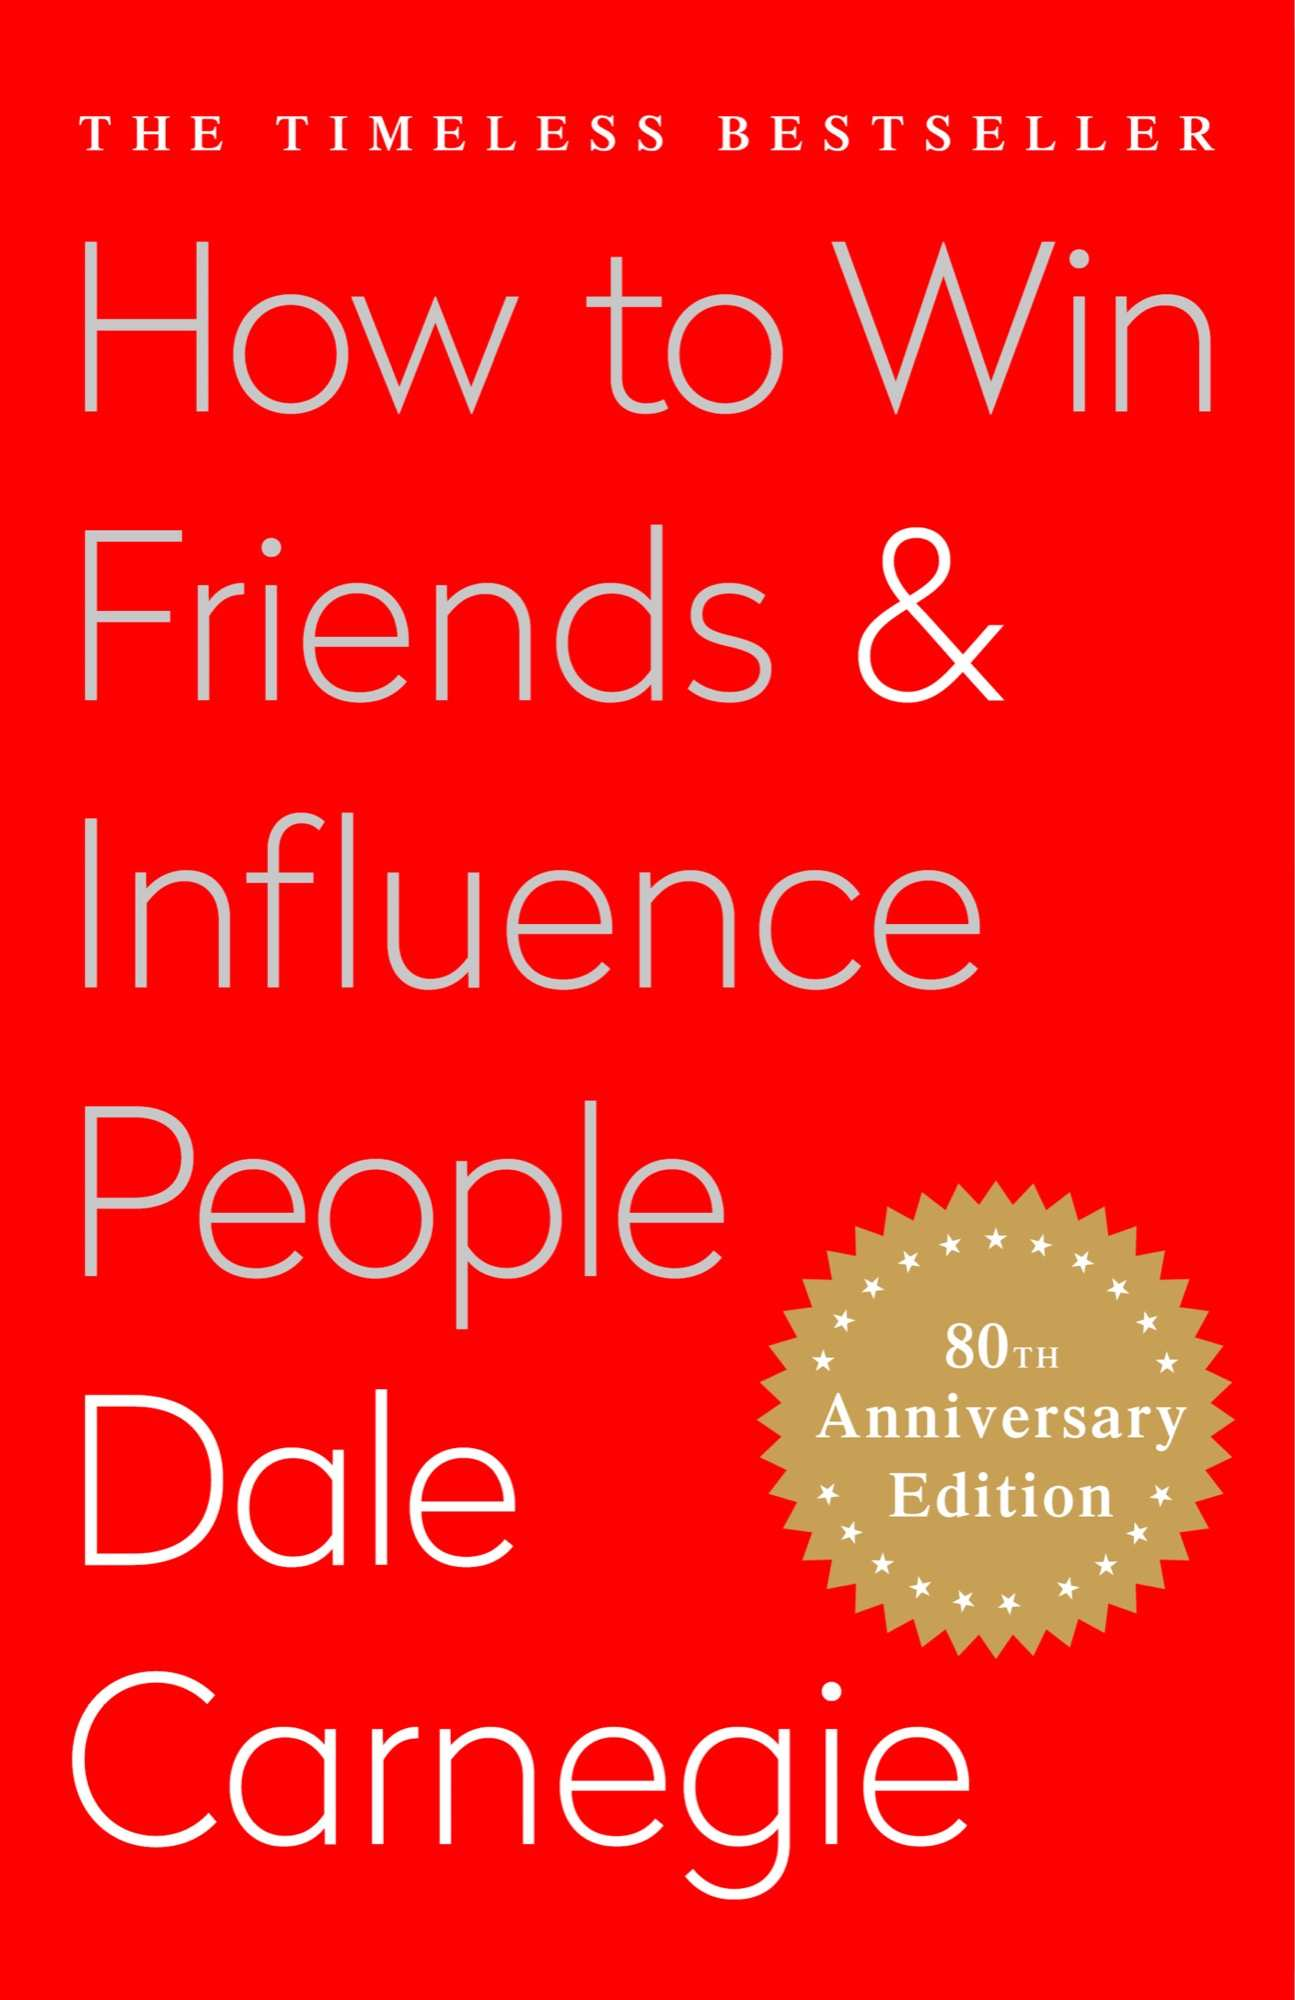 How to Win Friends and Influence People book summary